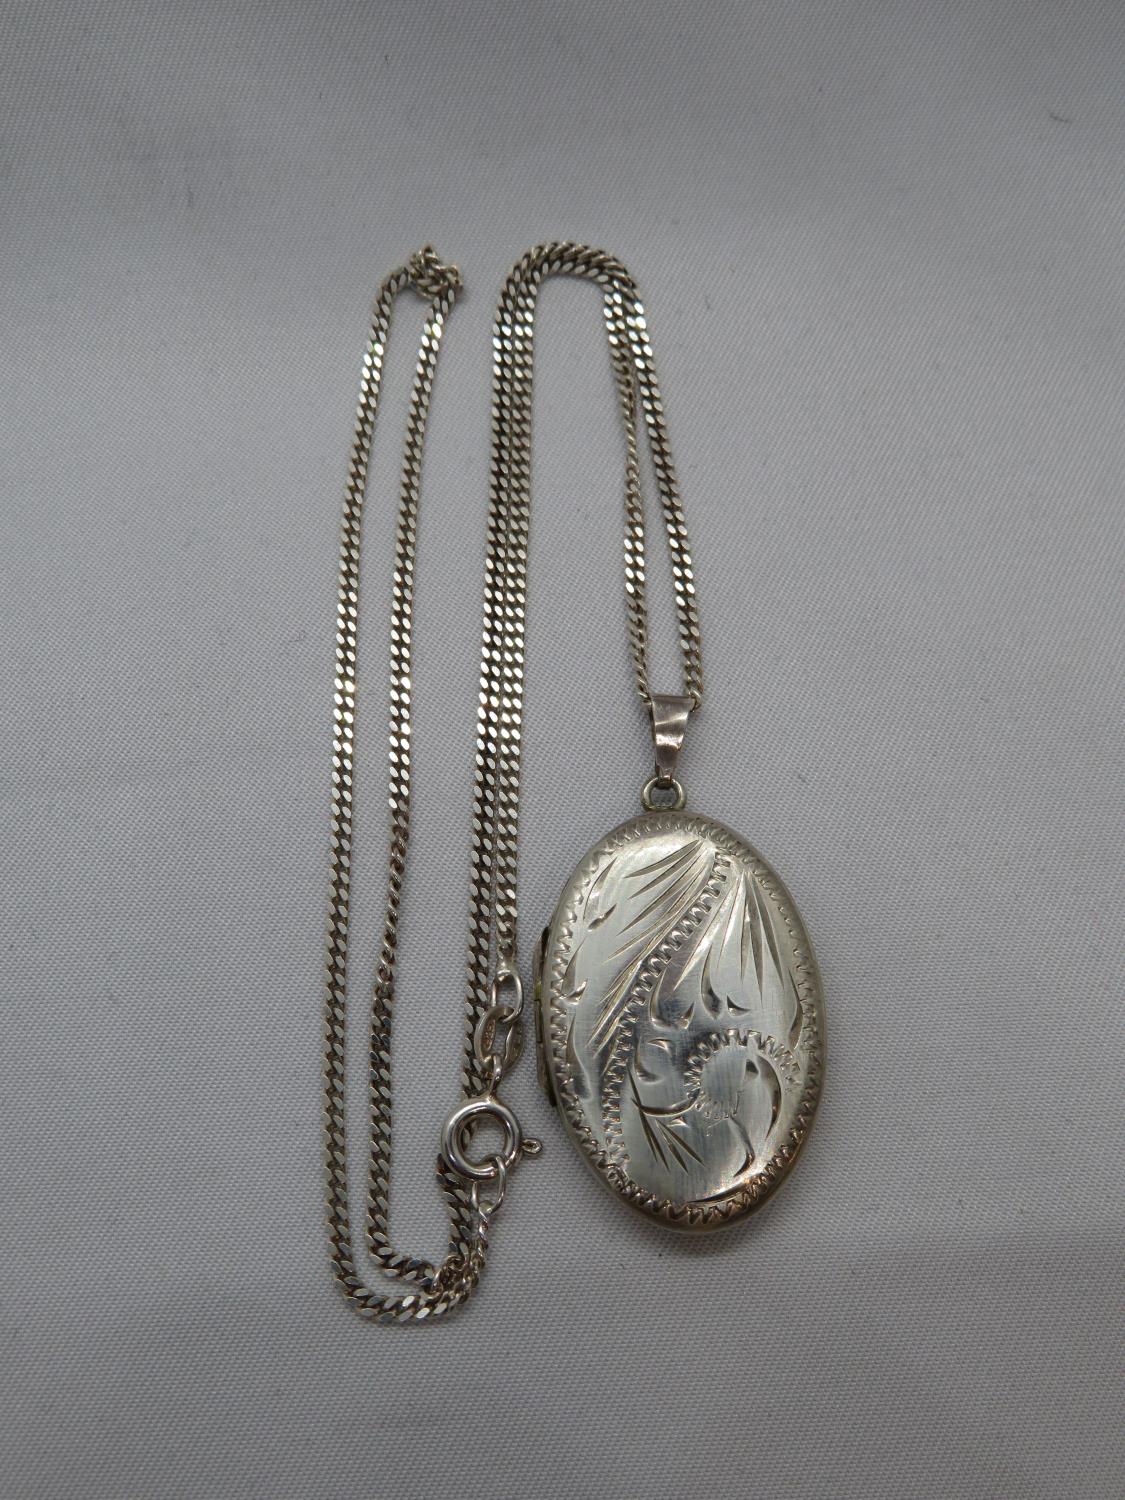 Vintage silver locket on 18" silver curb link chain